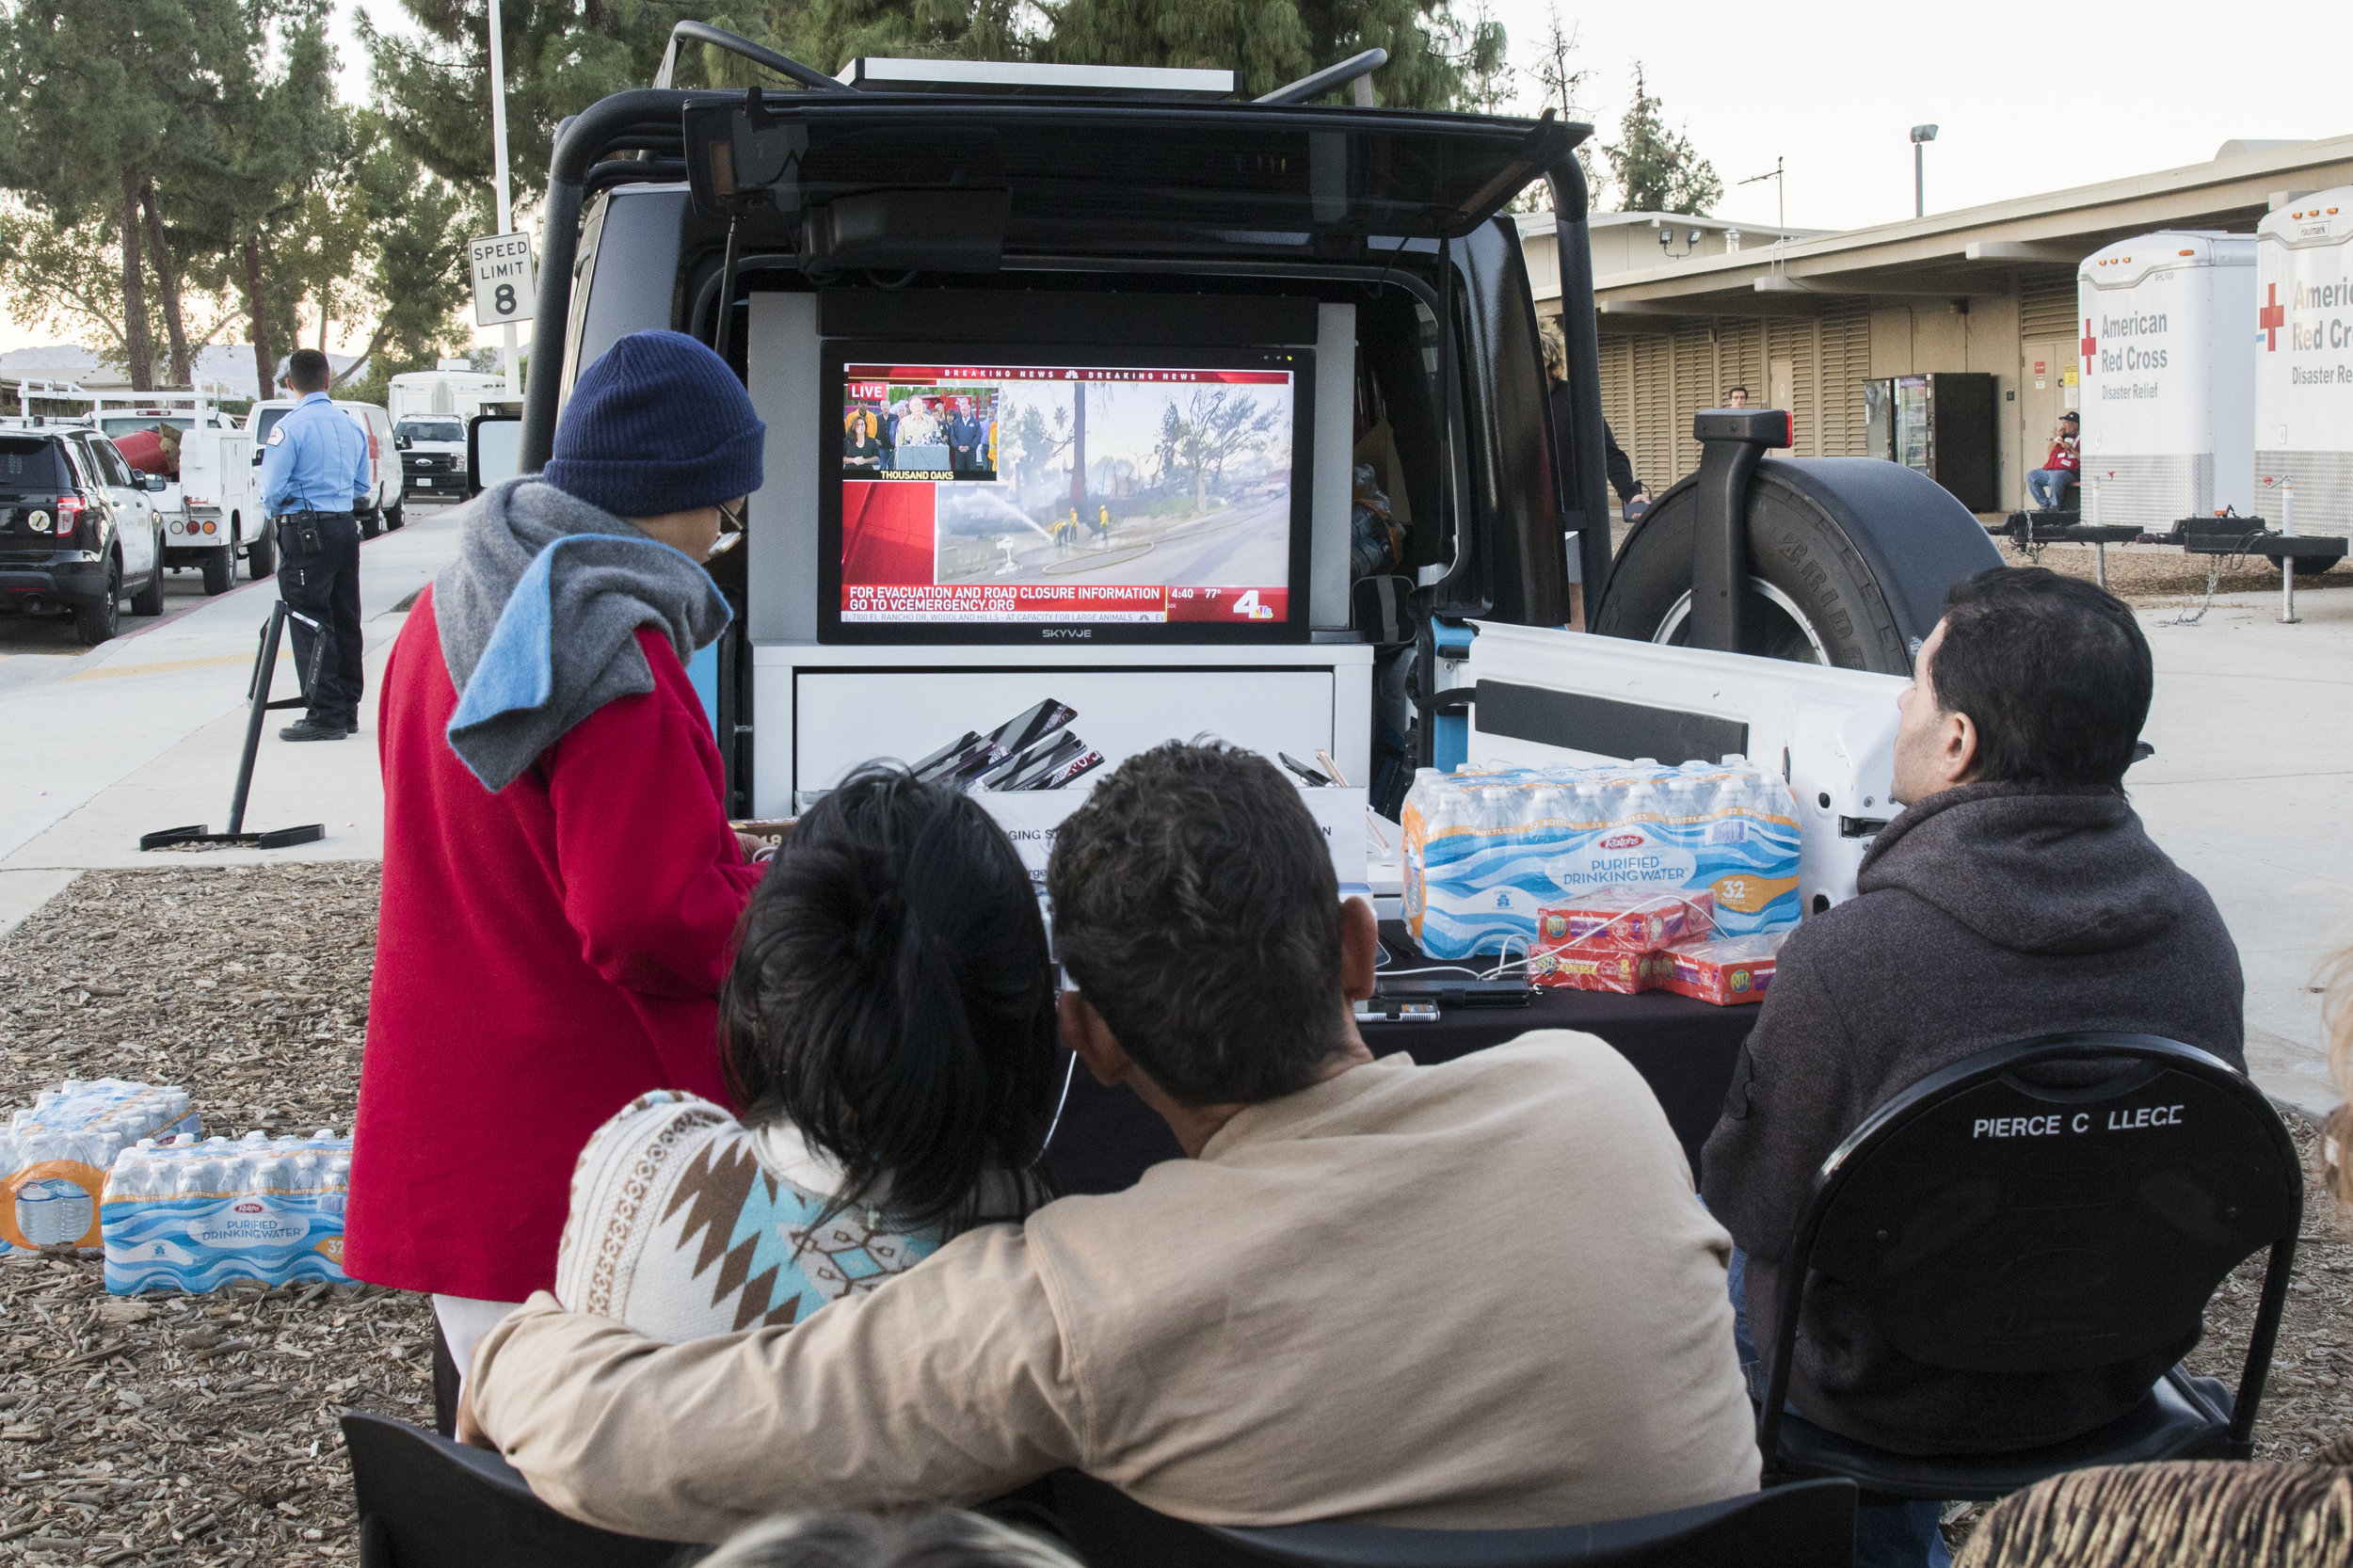  People at an evacuation center located at Pierce College in Woodland HIlls, California watch live news to get updates on their homes on November 9, 2018. (Zane Meyer-Thornton/Corsair Photo) 